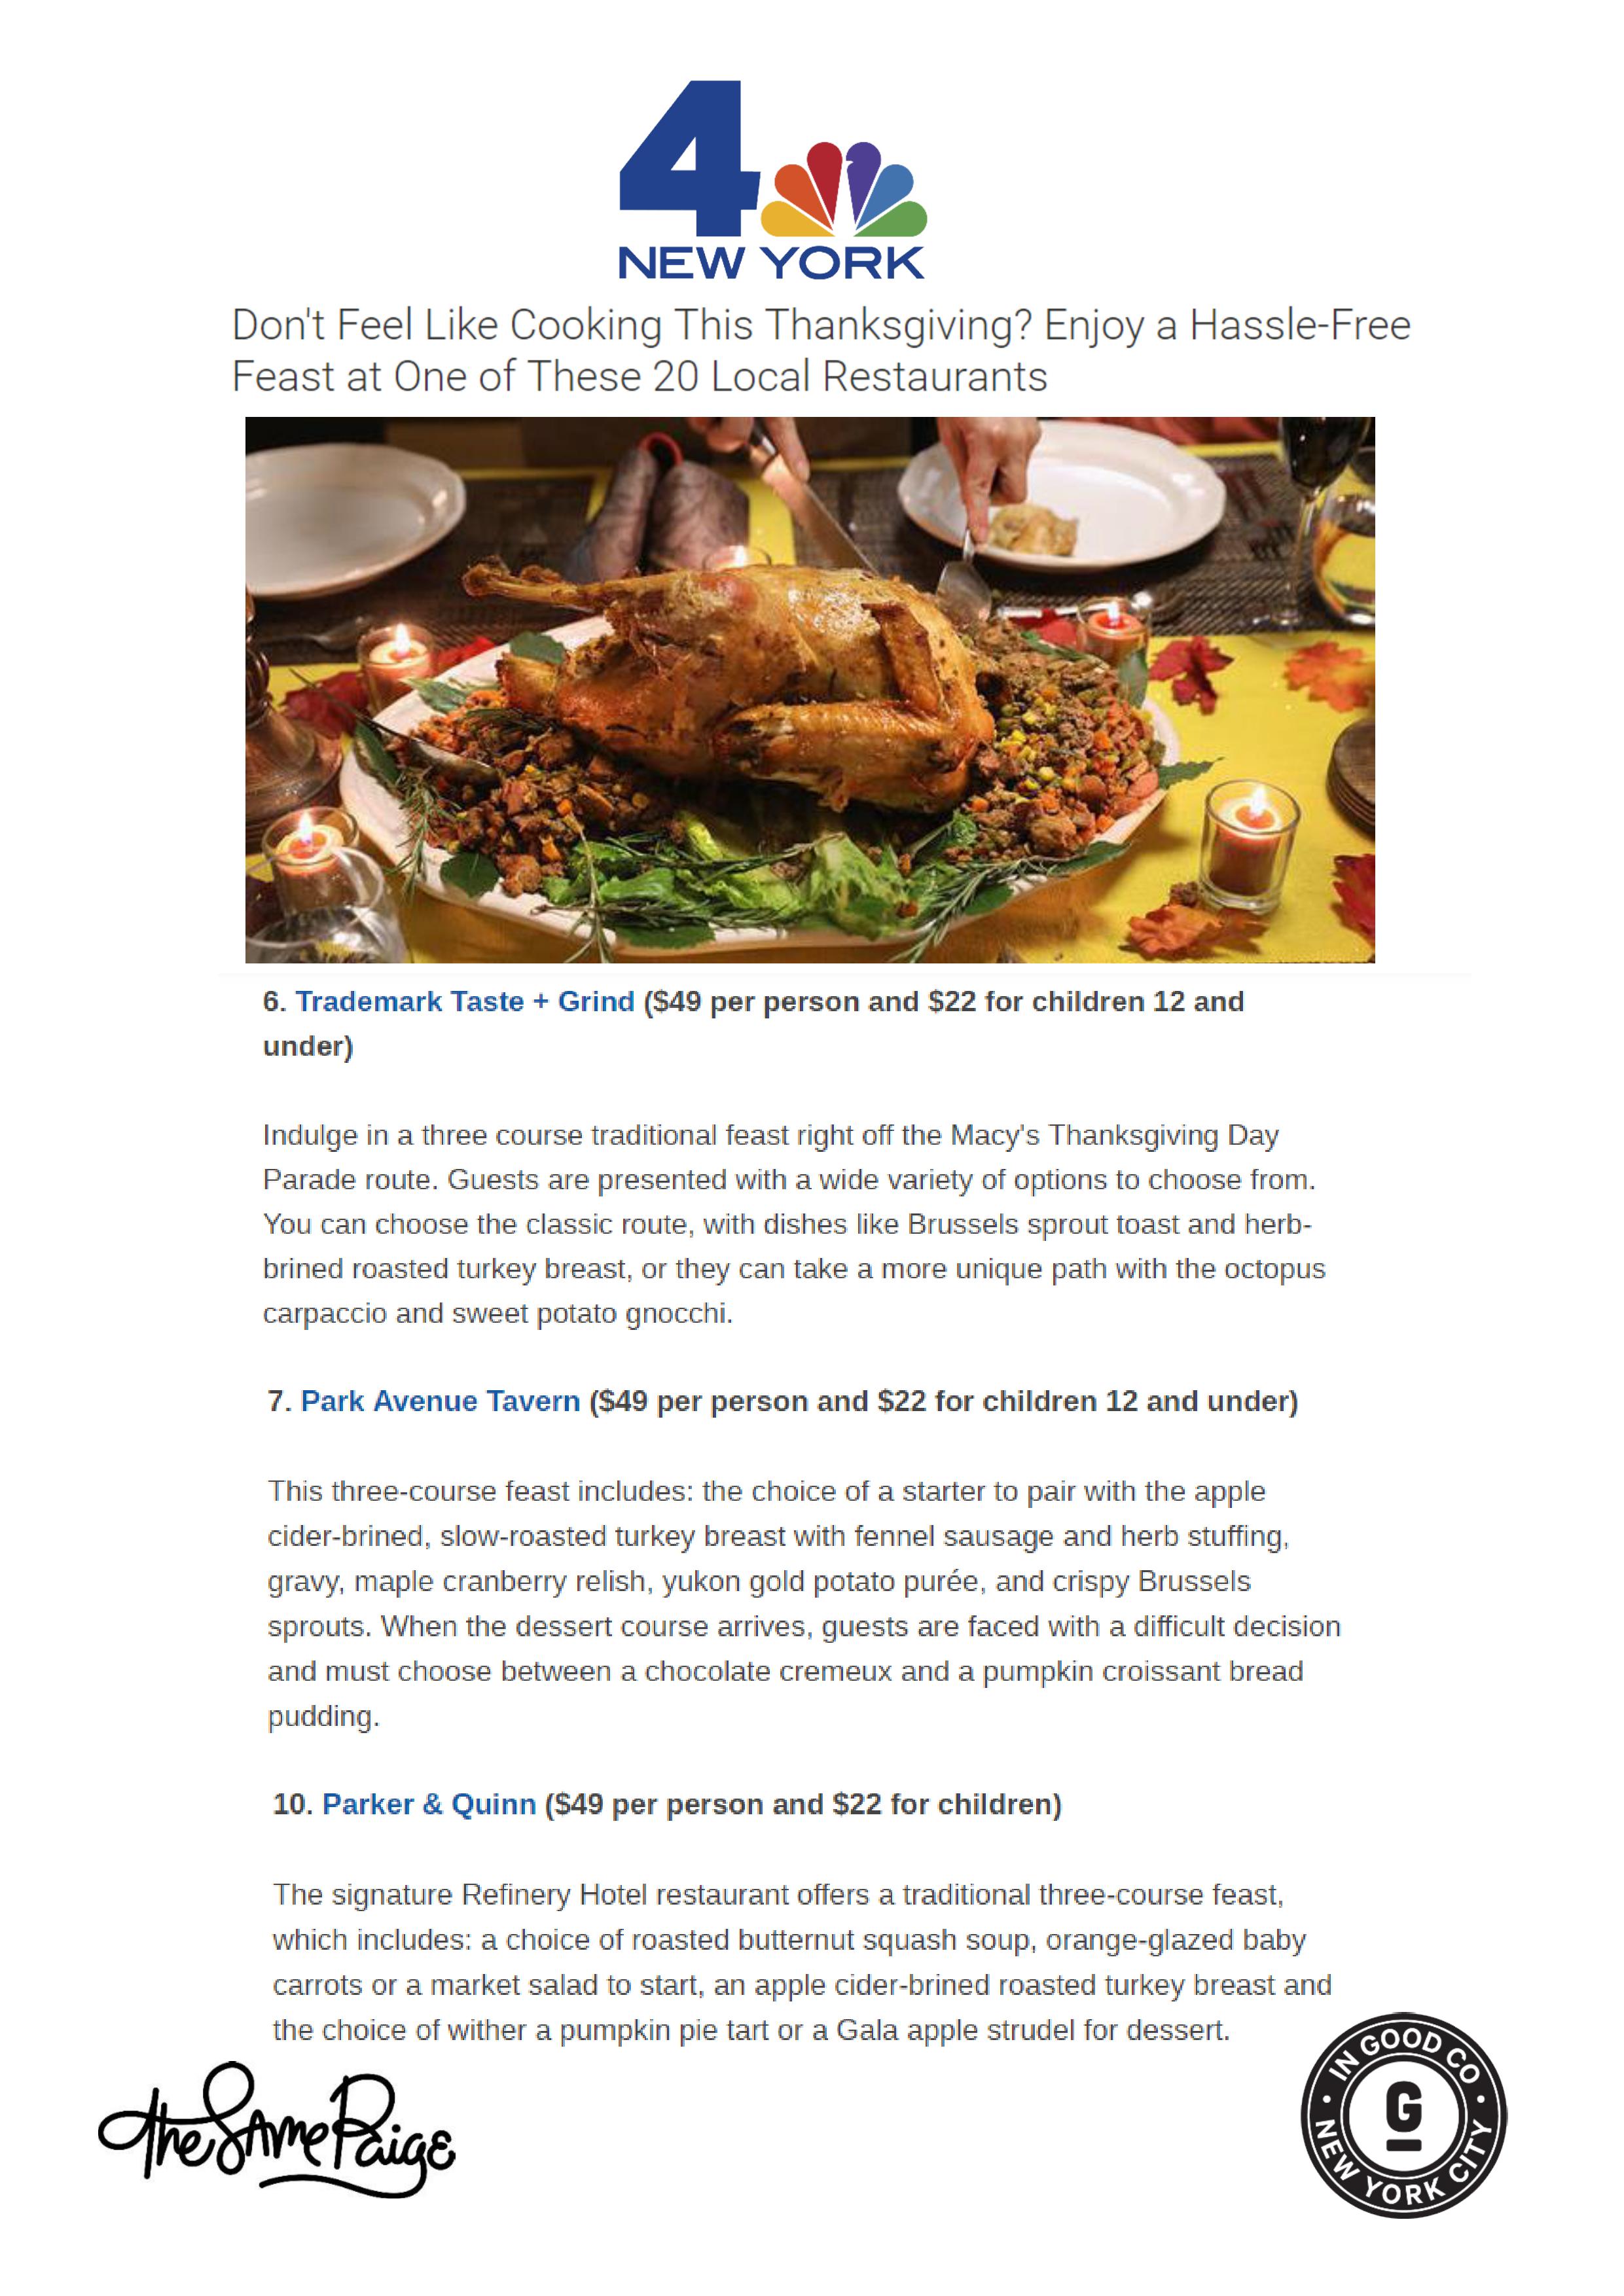 https://www.nbcnewyork.com/news/local/Thanksgiving-Dinner-Reservations-Takeout-New-York-New-Jersey-Connecticut-457519873.html